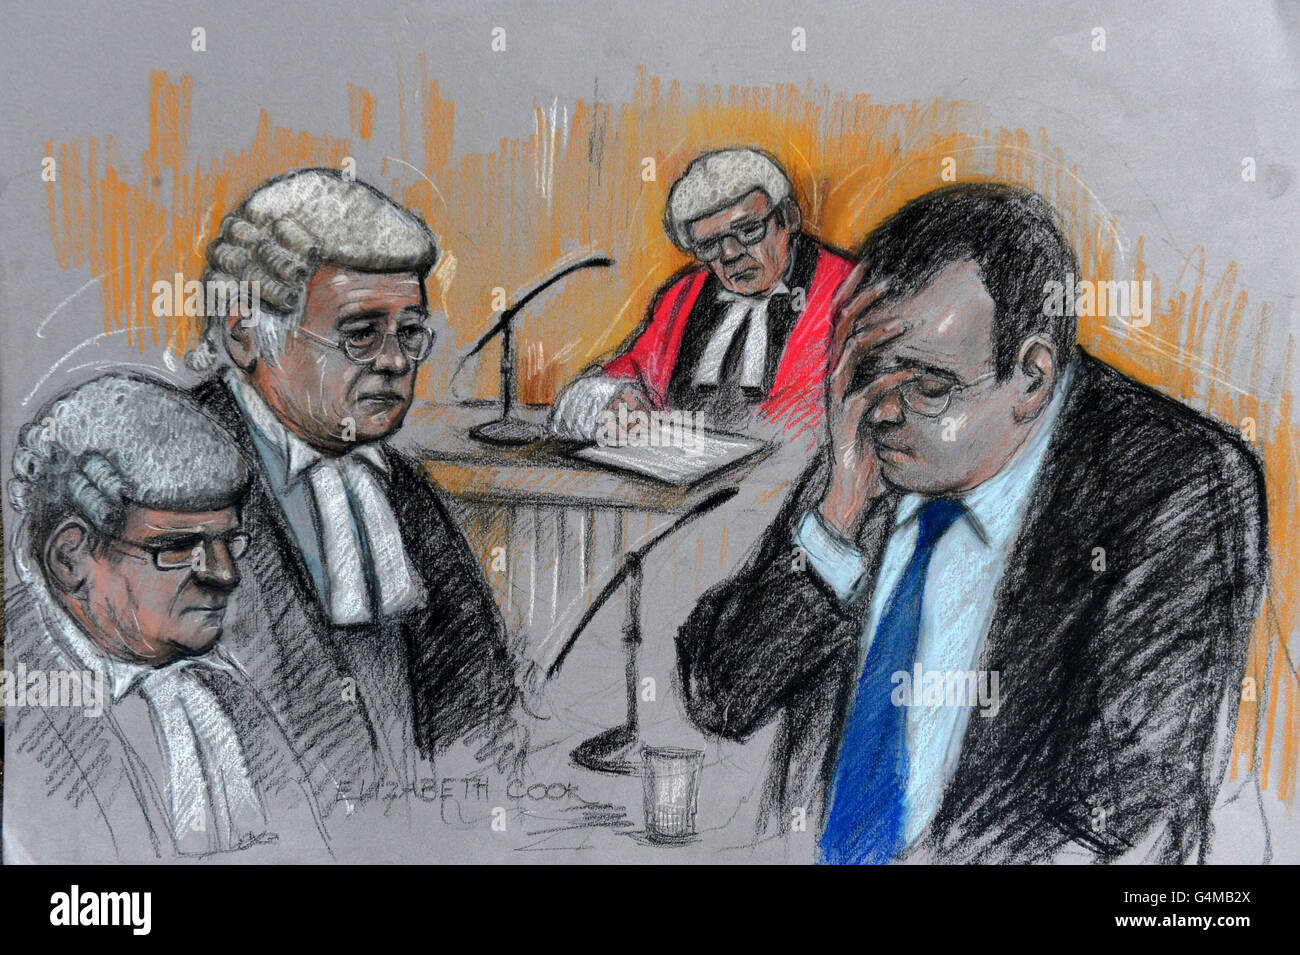 Court artist sketch of Vincent Tabak giving evidence at Bristol Crown court where he stands accused of the murder of Joanna Yeates. Stock Photo